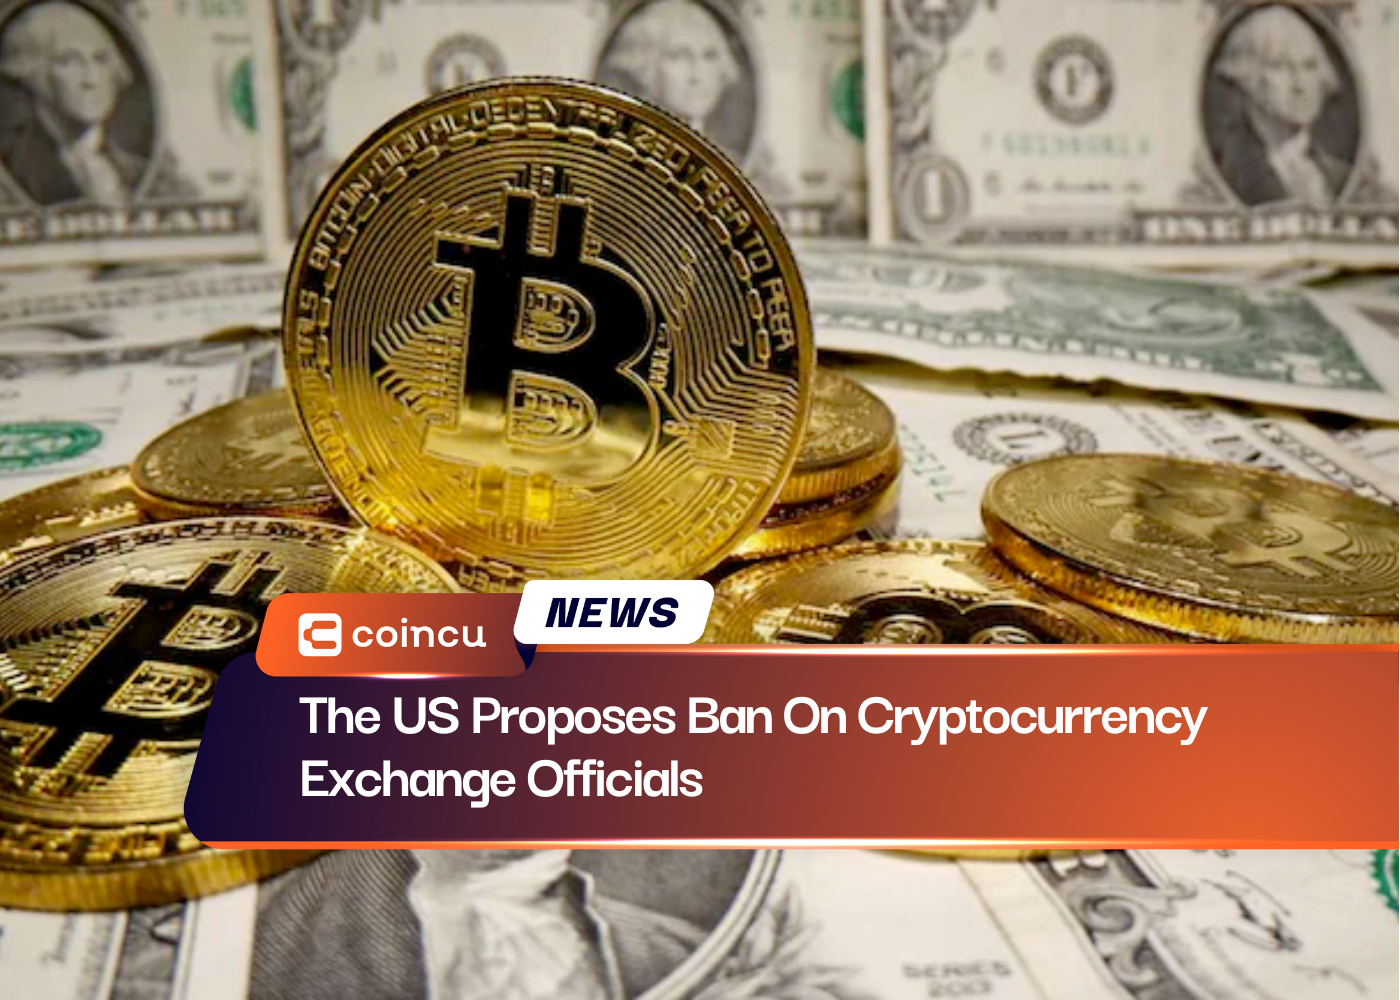 The US Proposes Ban On Cryptocurrency Exchange Officials